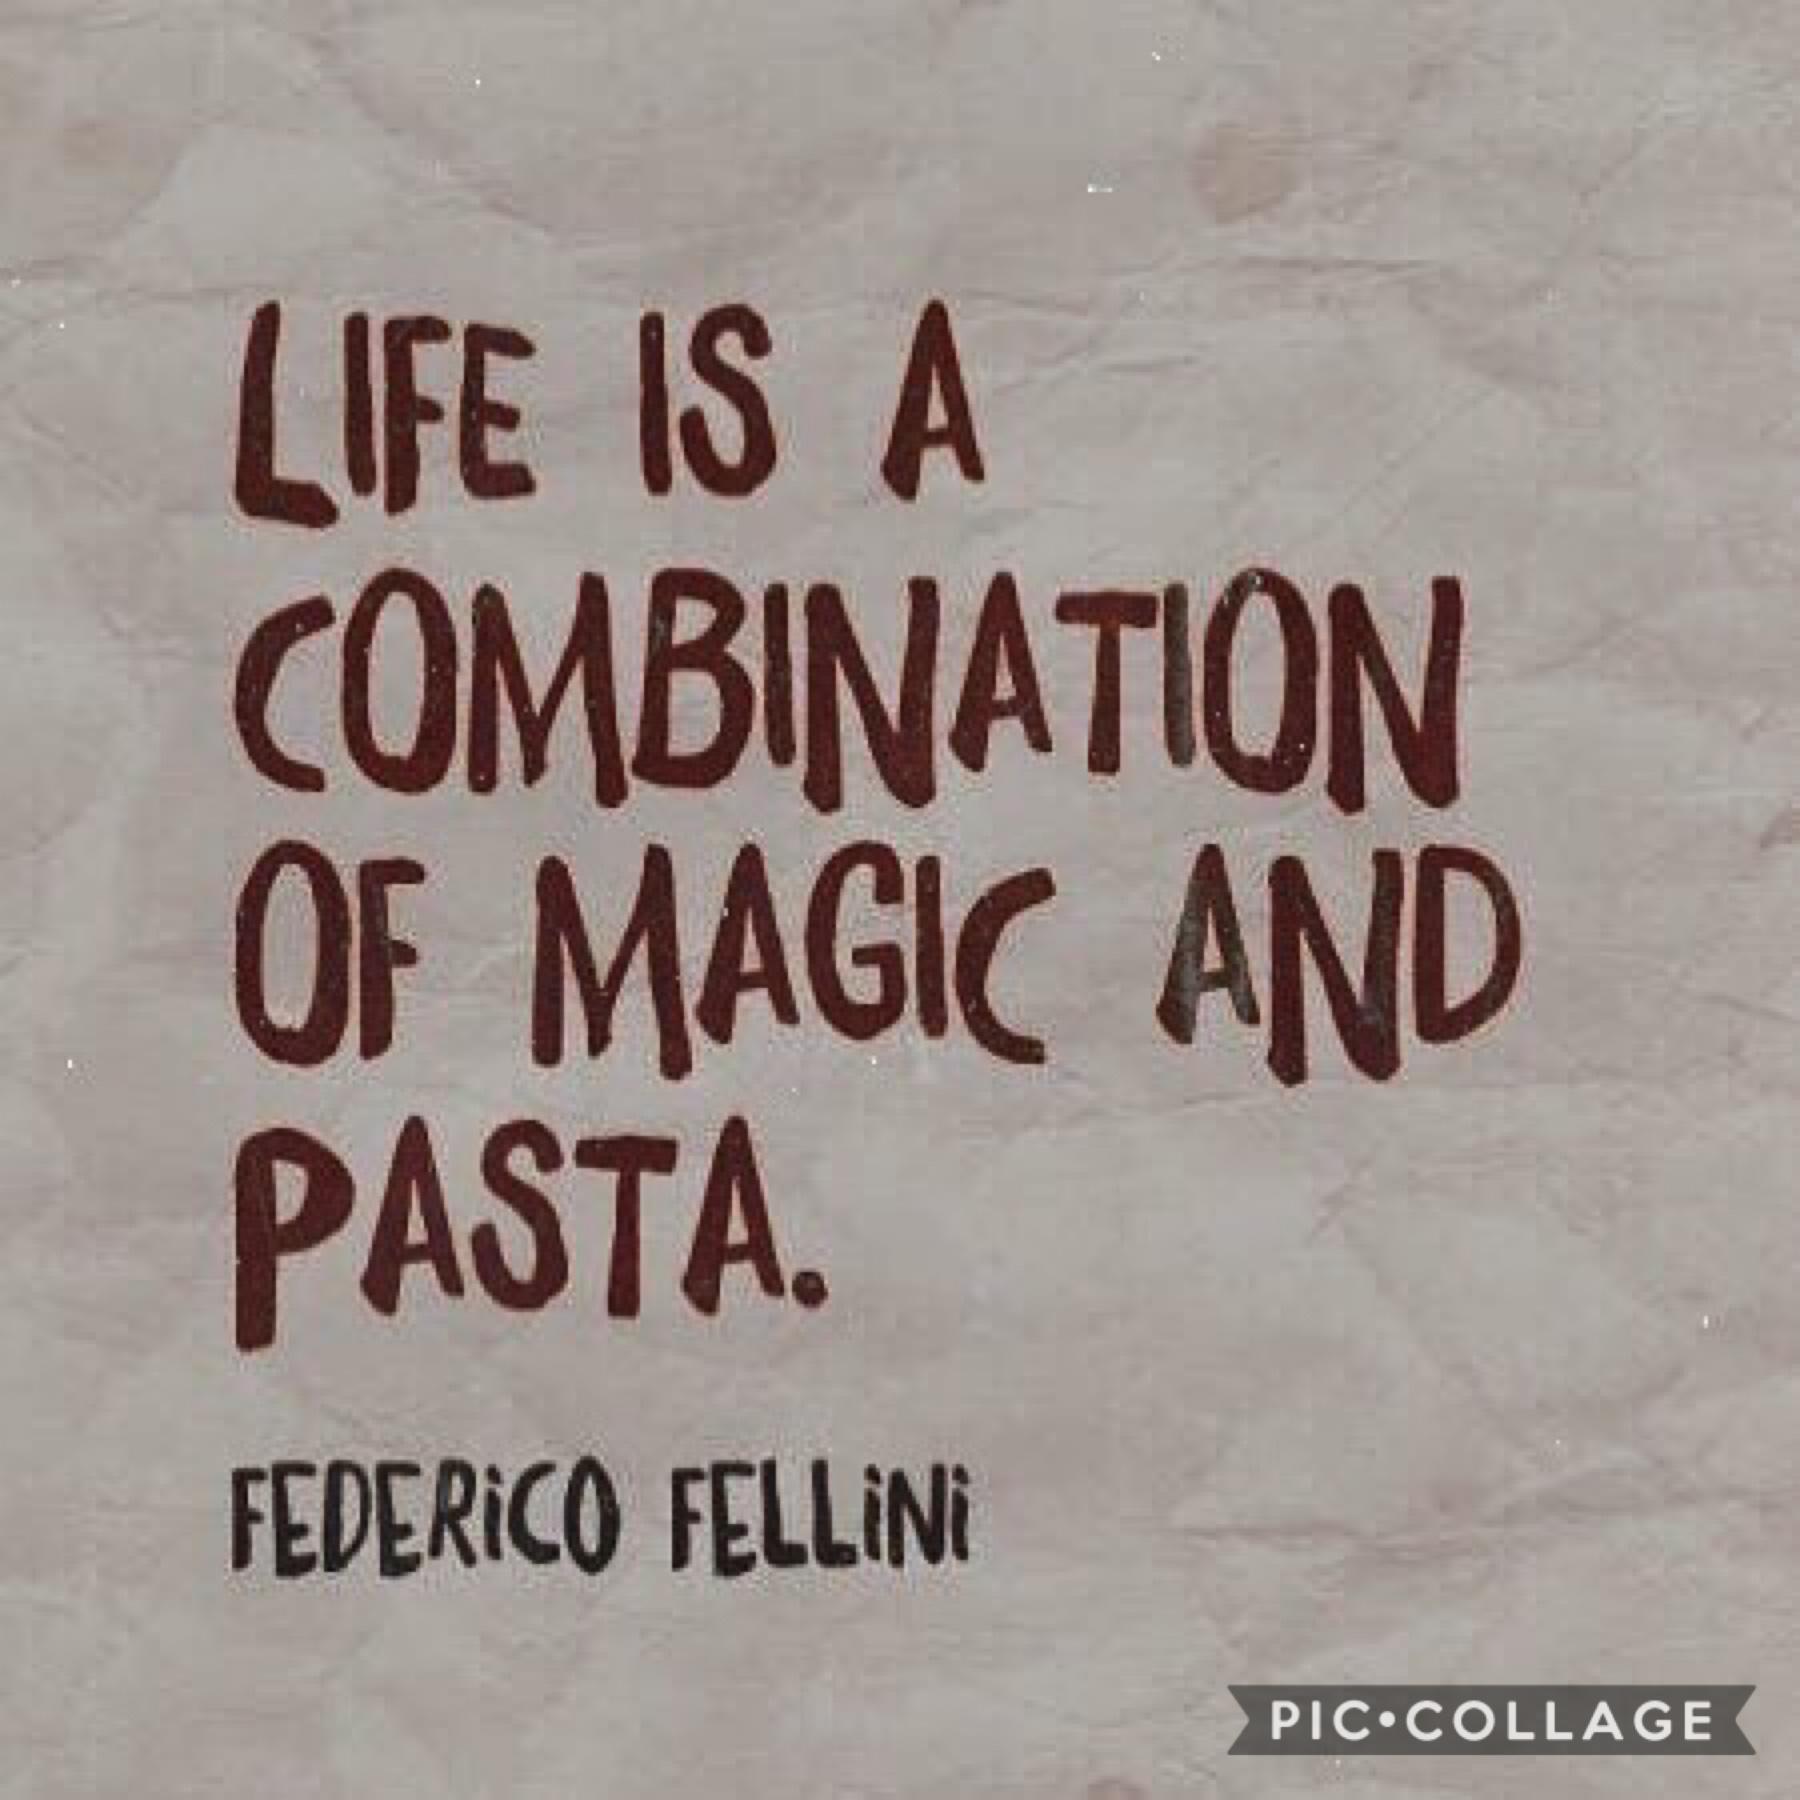 This quote speaks to me on a spiritual level. Seriously tho, there’s very few things i care about but pasta is definitely one of them. 🍝